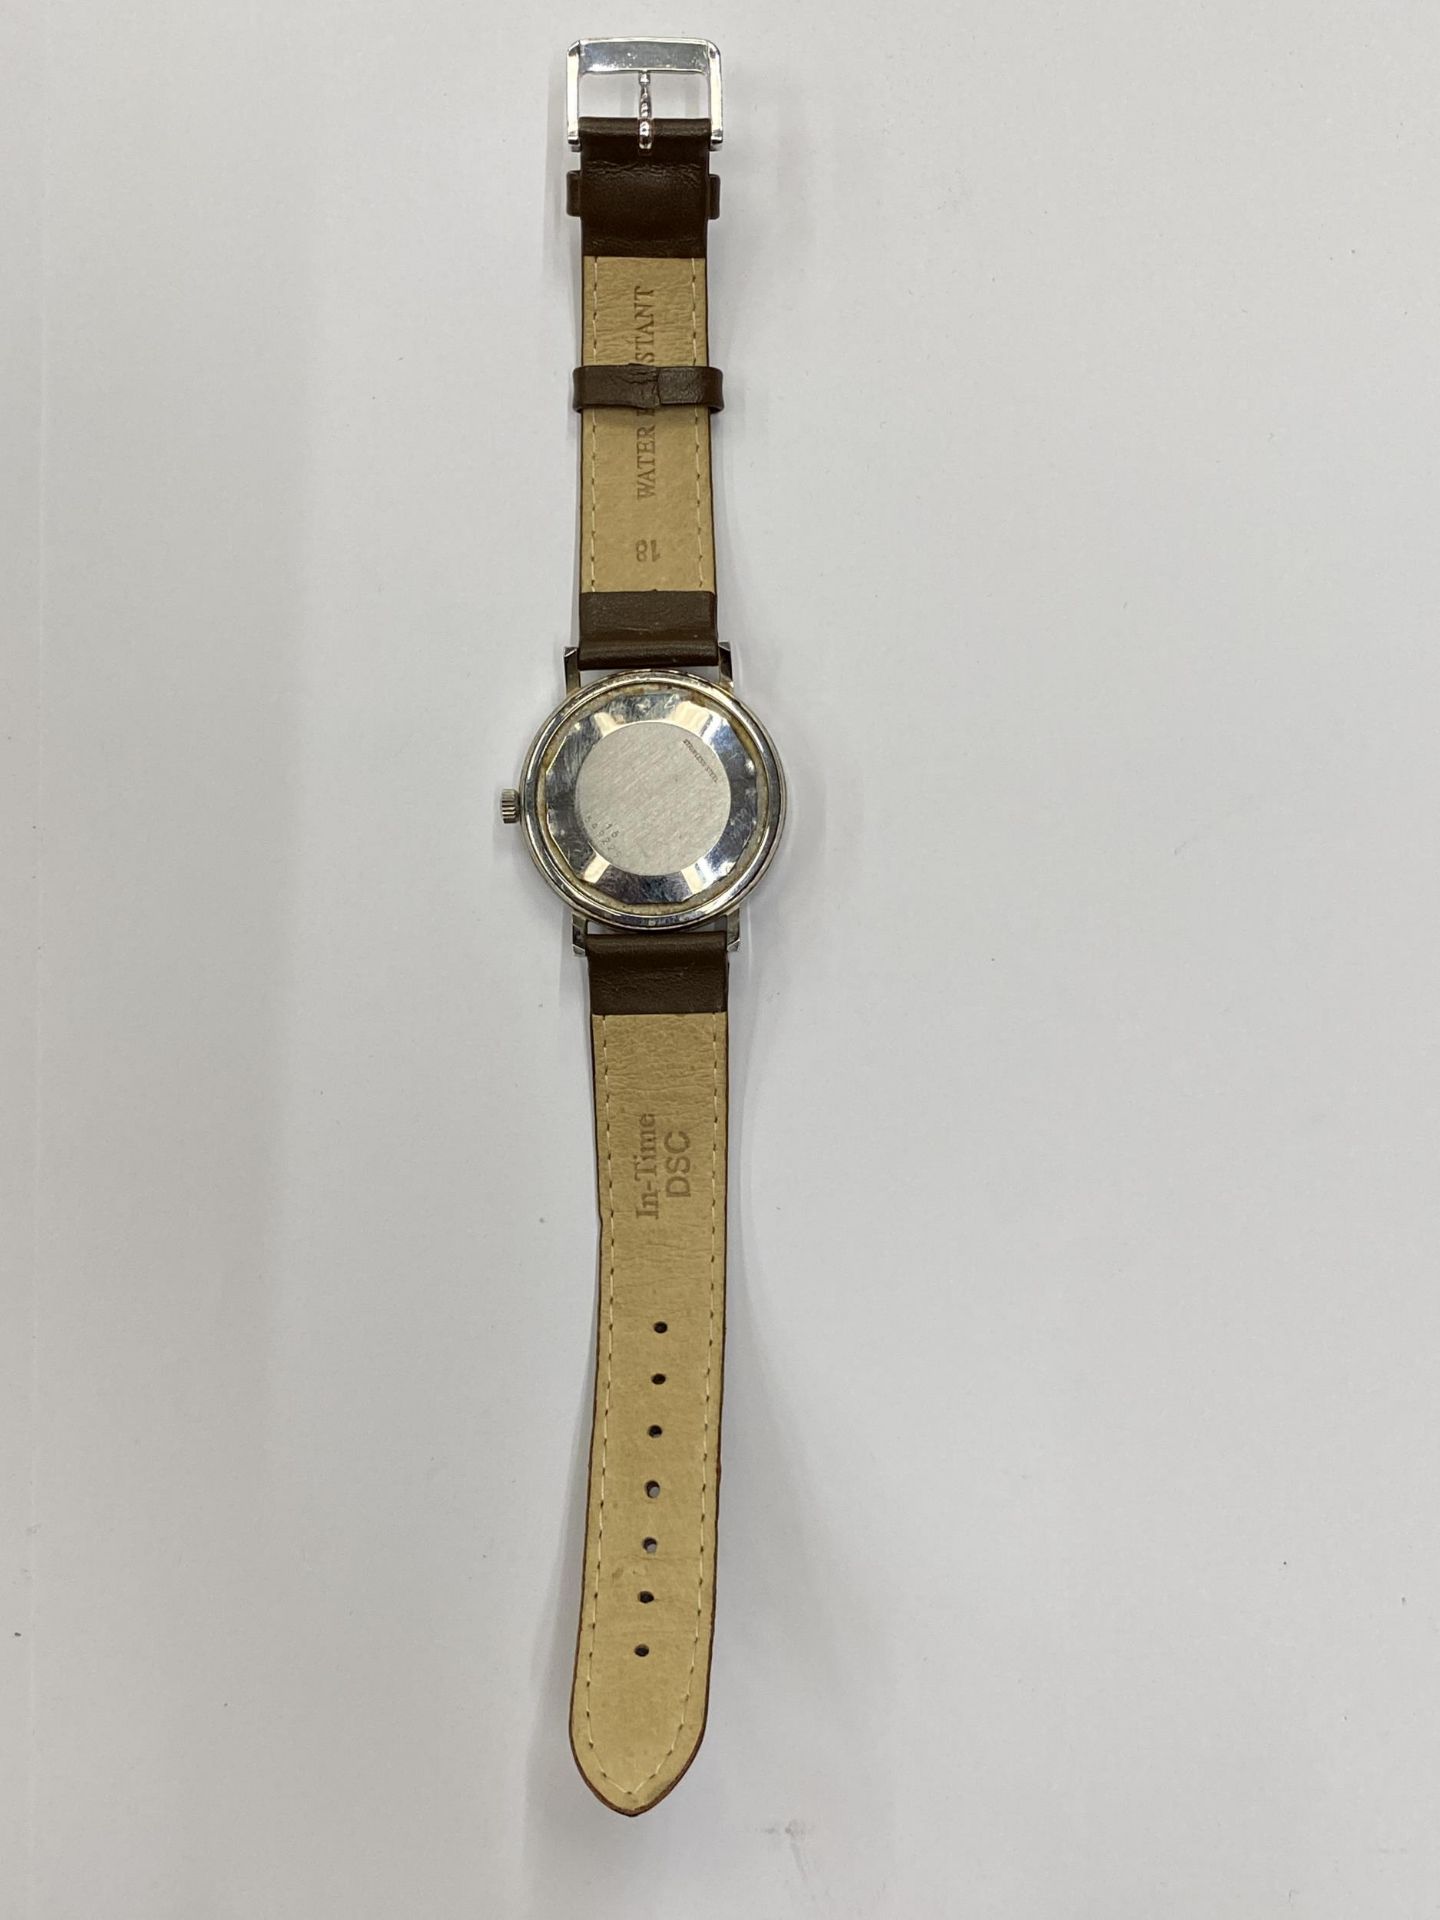 A VINTAGE LONGINES CONQUEST AUTOMATIC WRIST WATCH WITH LEATHER STRAP SEEN WORKING BUT NO WARRANTY - Image 6 of 6